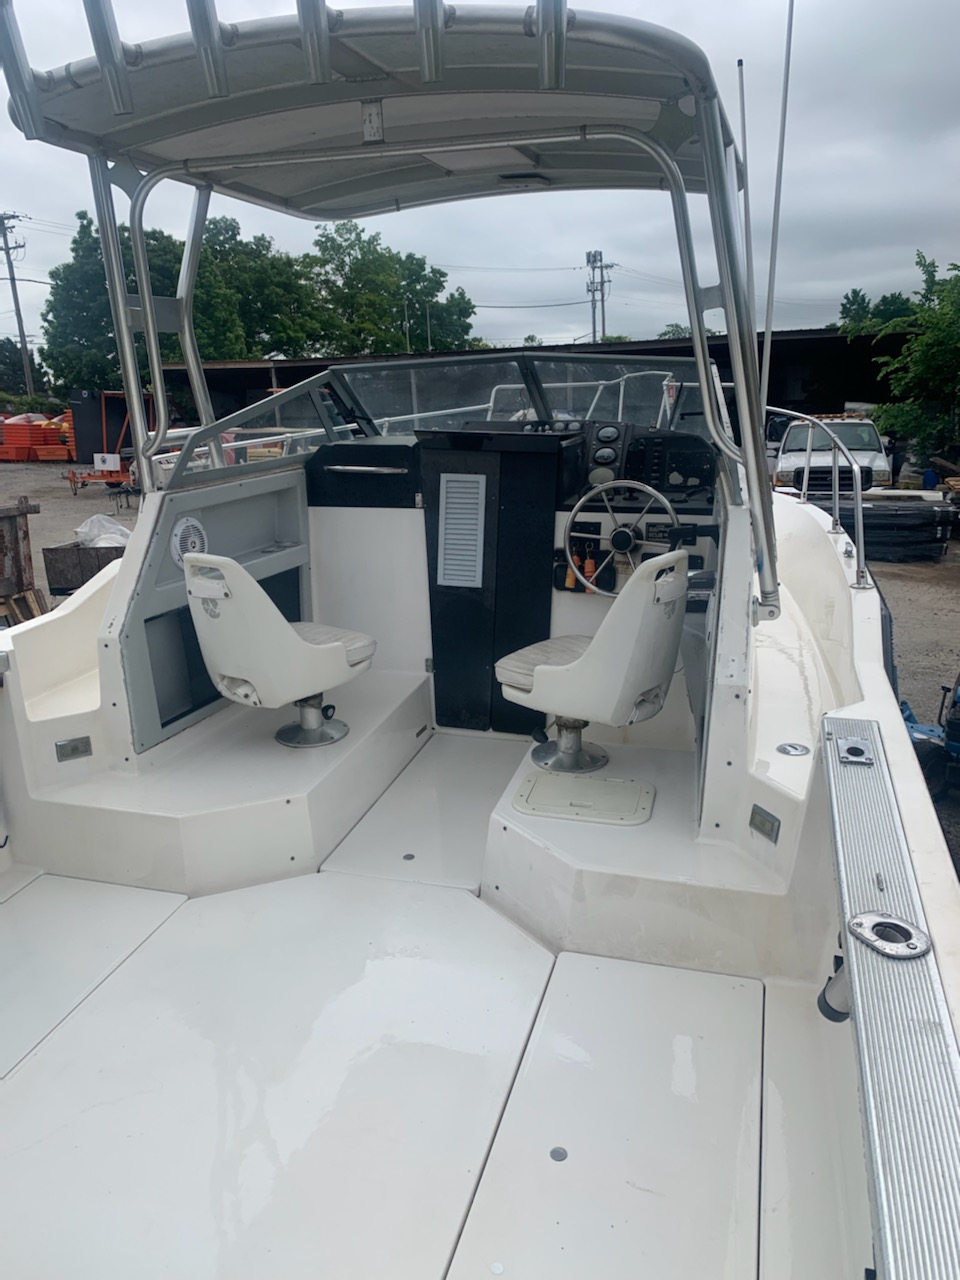 1989 23 foot Bayliner Trophy Power boat for sale in Annapolis Jct, MD - image 11 